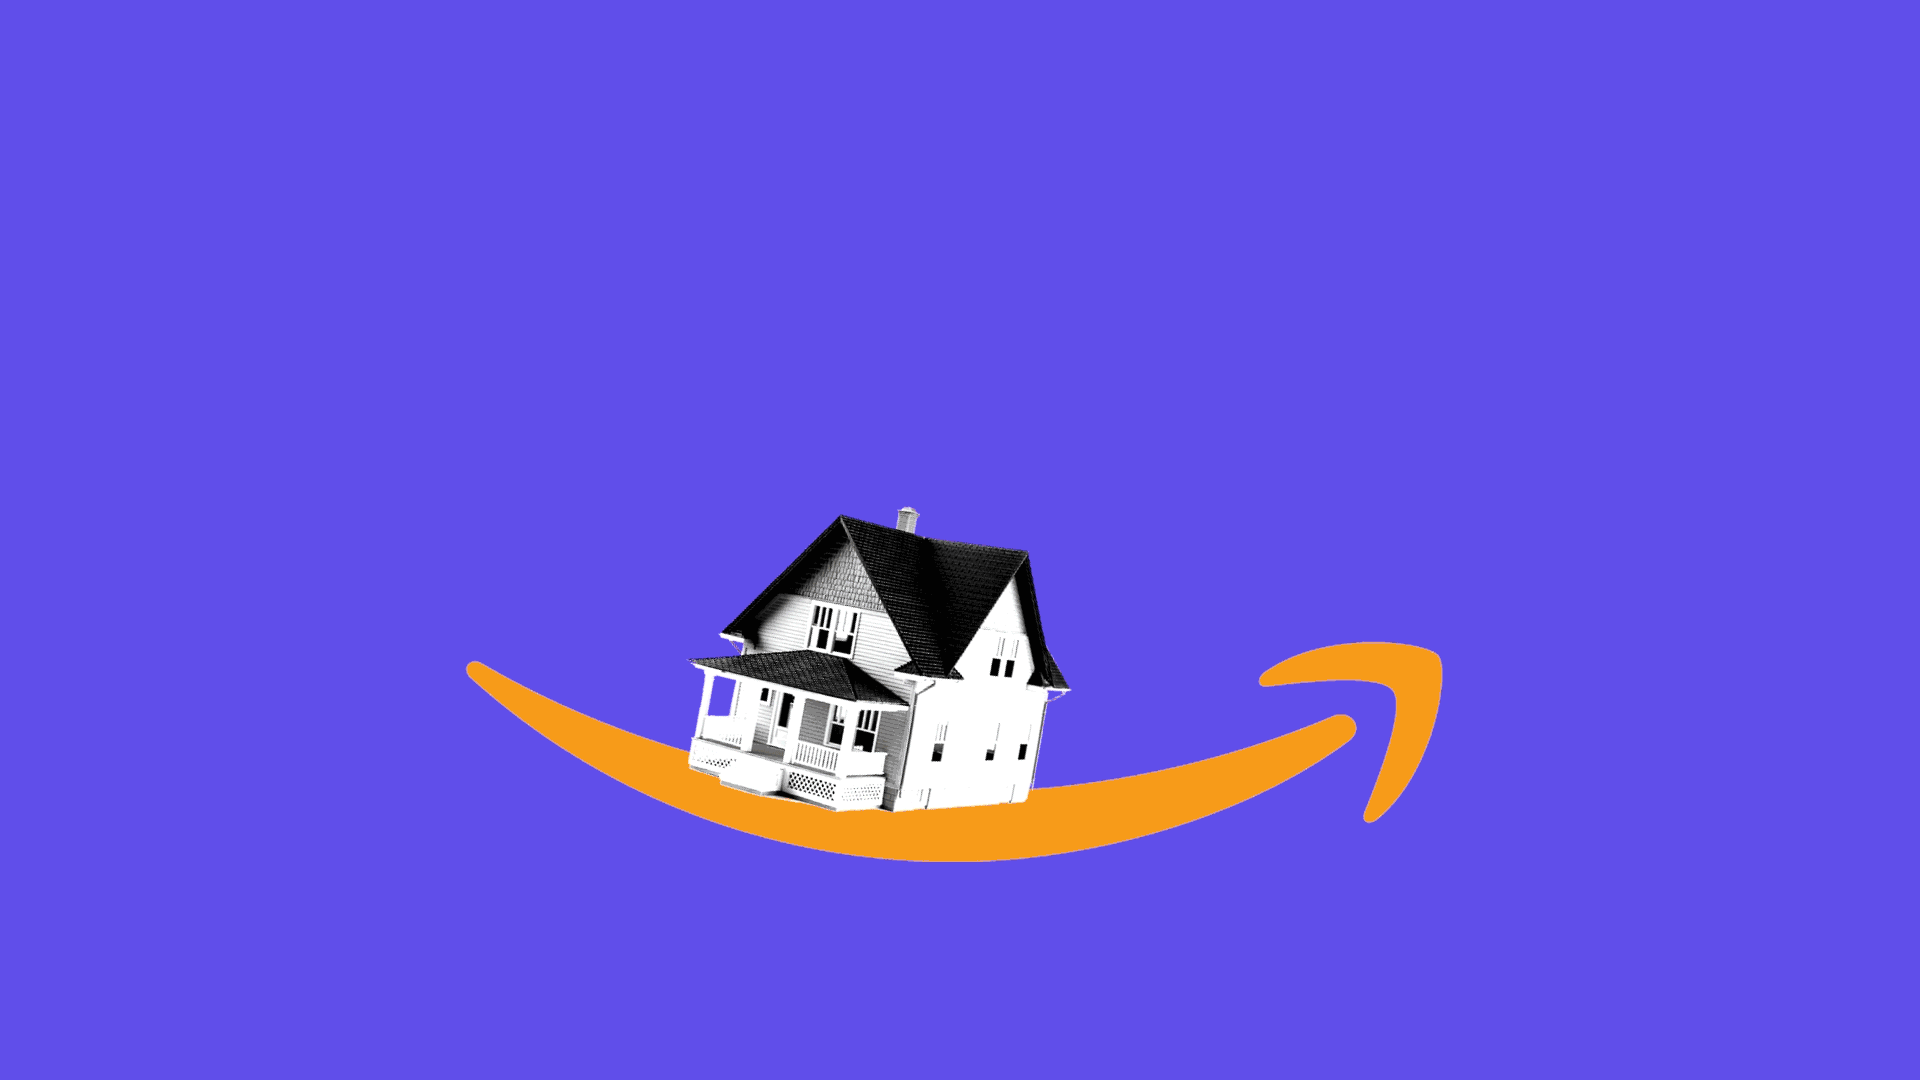 Wherever Amazon HQ2 goes, high home prices will likely follow - Axios